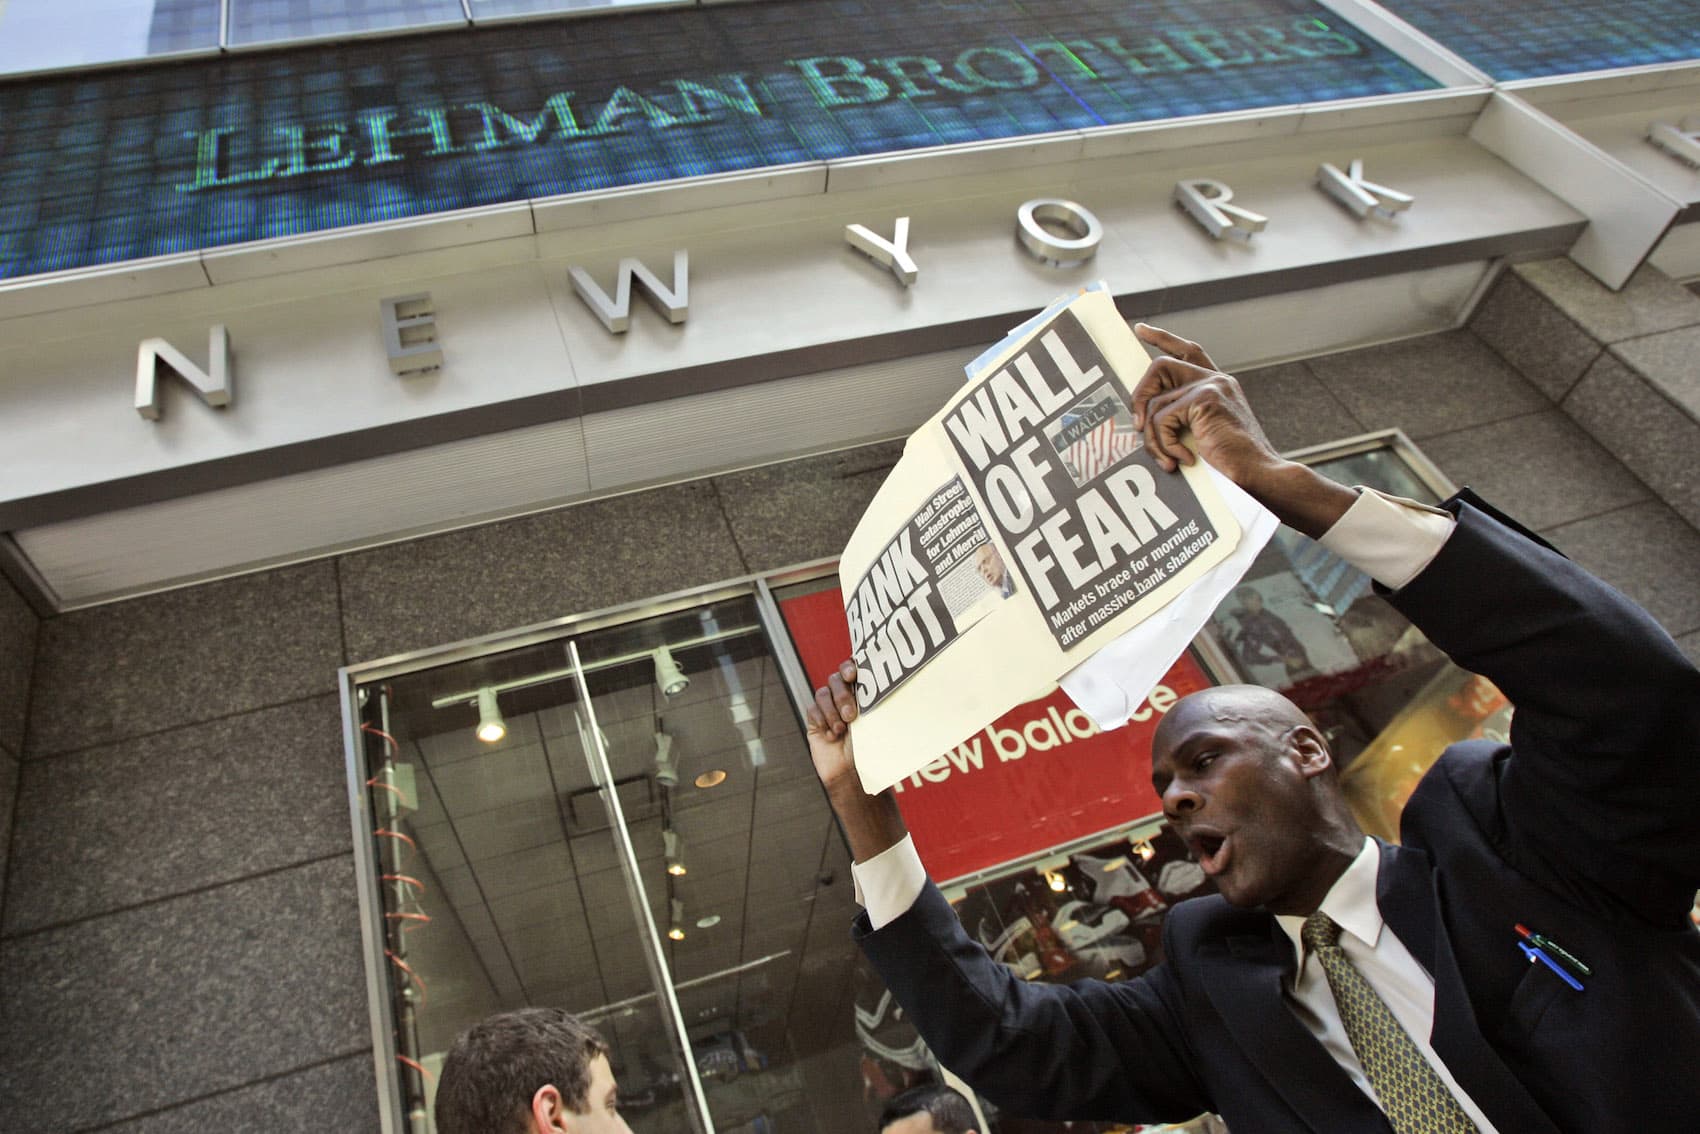 A man demonstrates outside the Lehman Brothers headquarters Monday, Sept. 15, 2008 in New York. When Wall Street woke up Monday morning, two more of its storied firms had fallen. Lehman Brothers, burdened by $60 billion in soured real-estate holdings, filed a Chapter 11 bankruptcy petition in U.S. Bankruptcy Court after attempts to rescue the 158-year-old firm failed. (Mary Altaffer/AP)